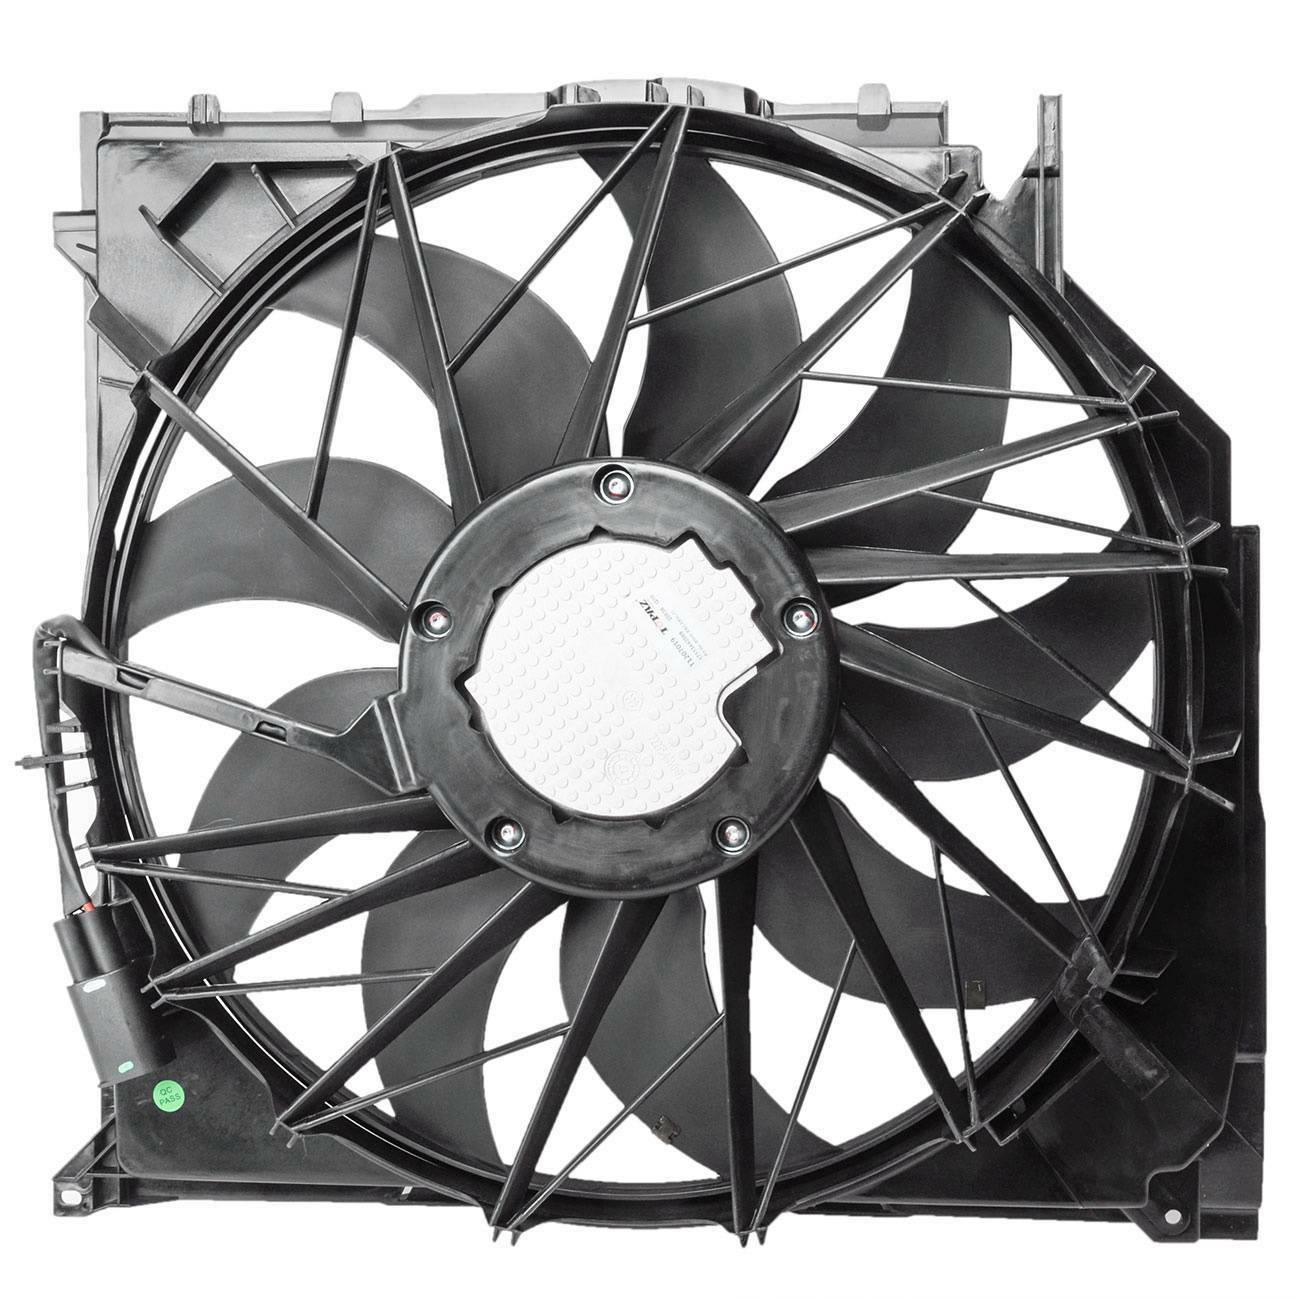 Radiator Condenser Cooling Fan Assembly for BMW X3 E83 3.0d 17113415181 German Made